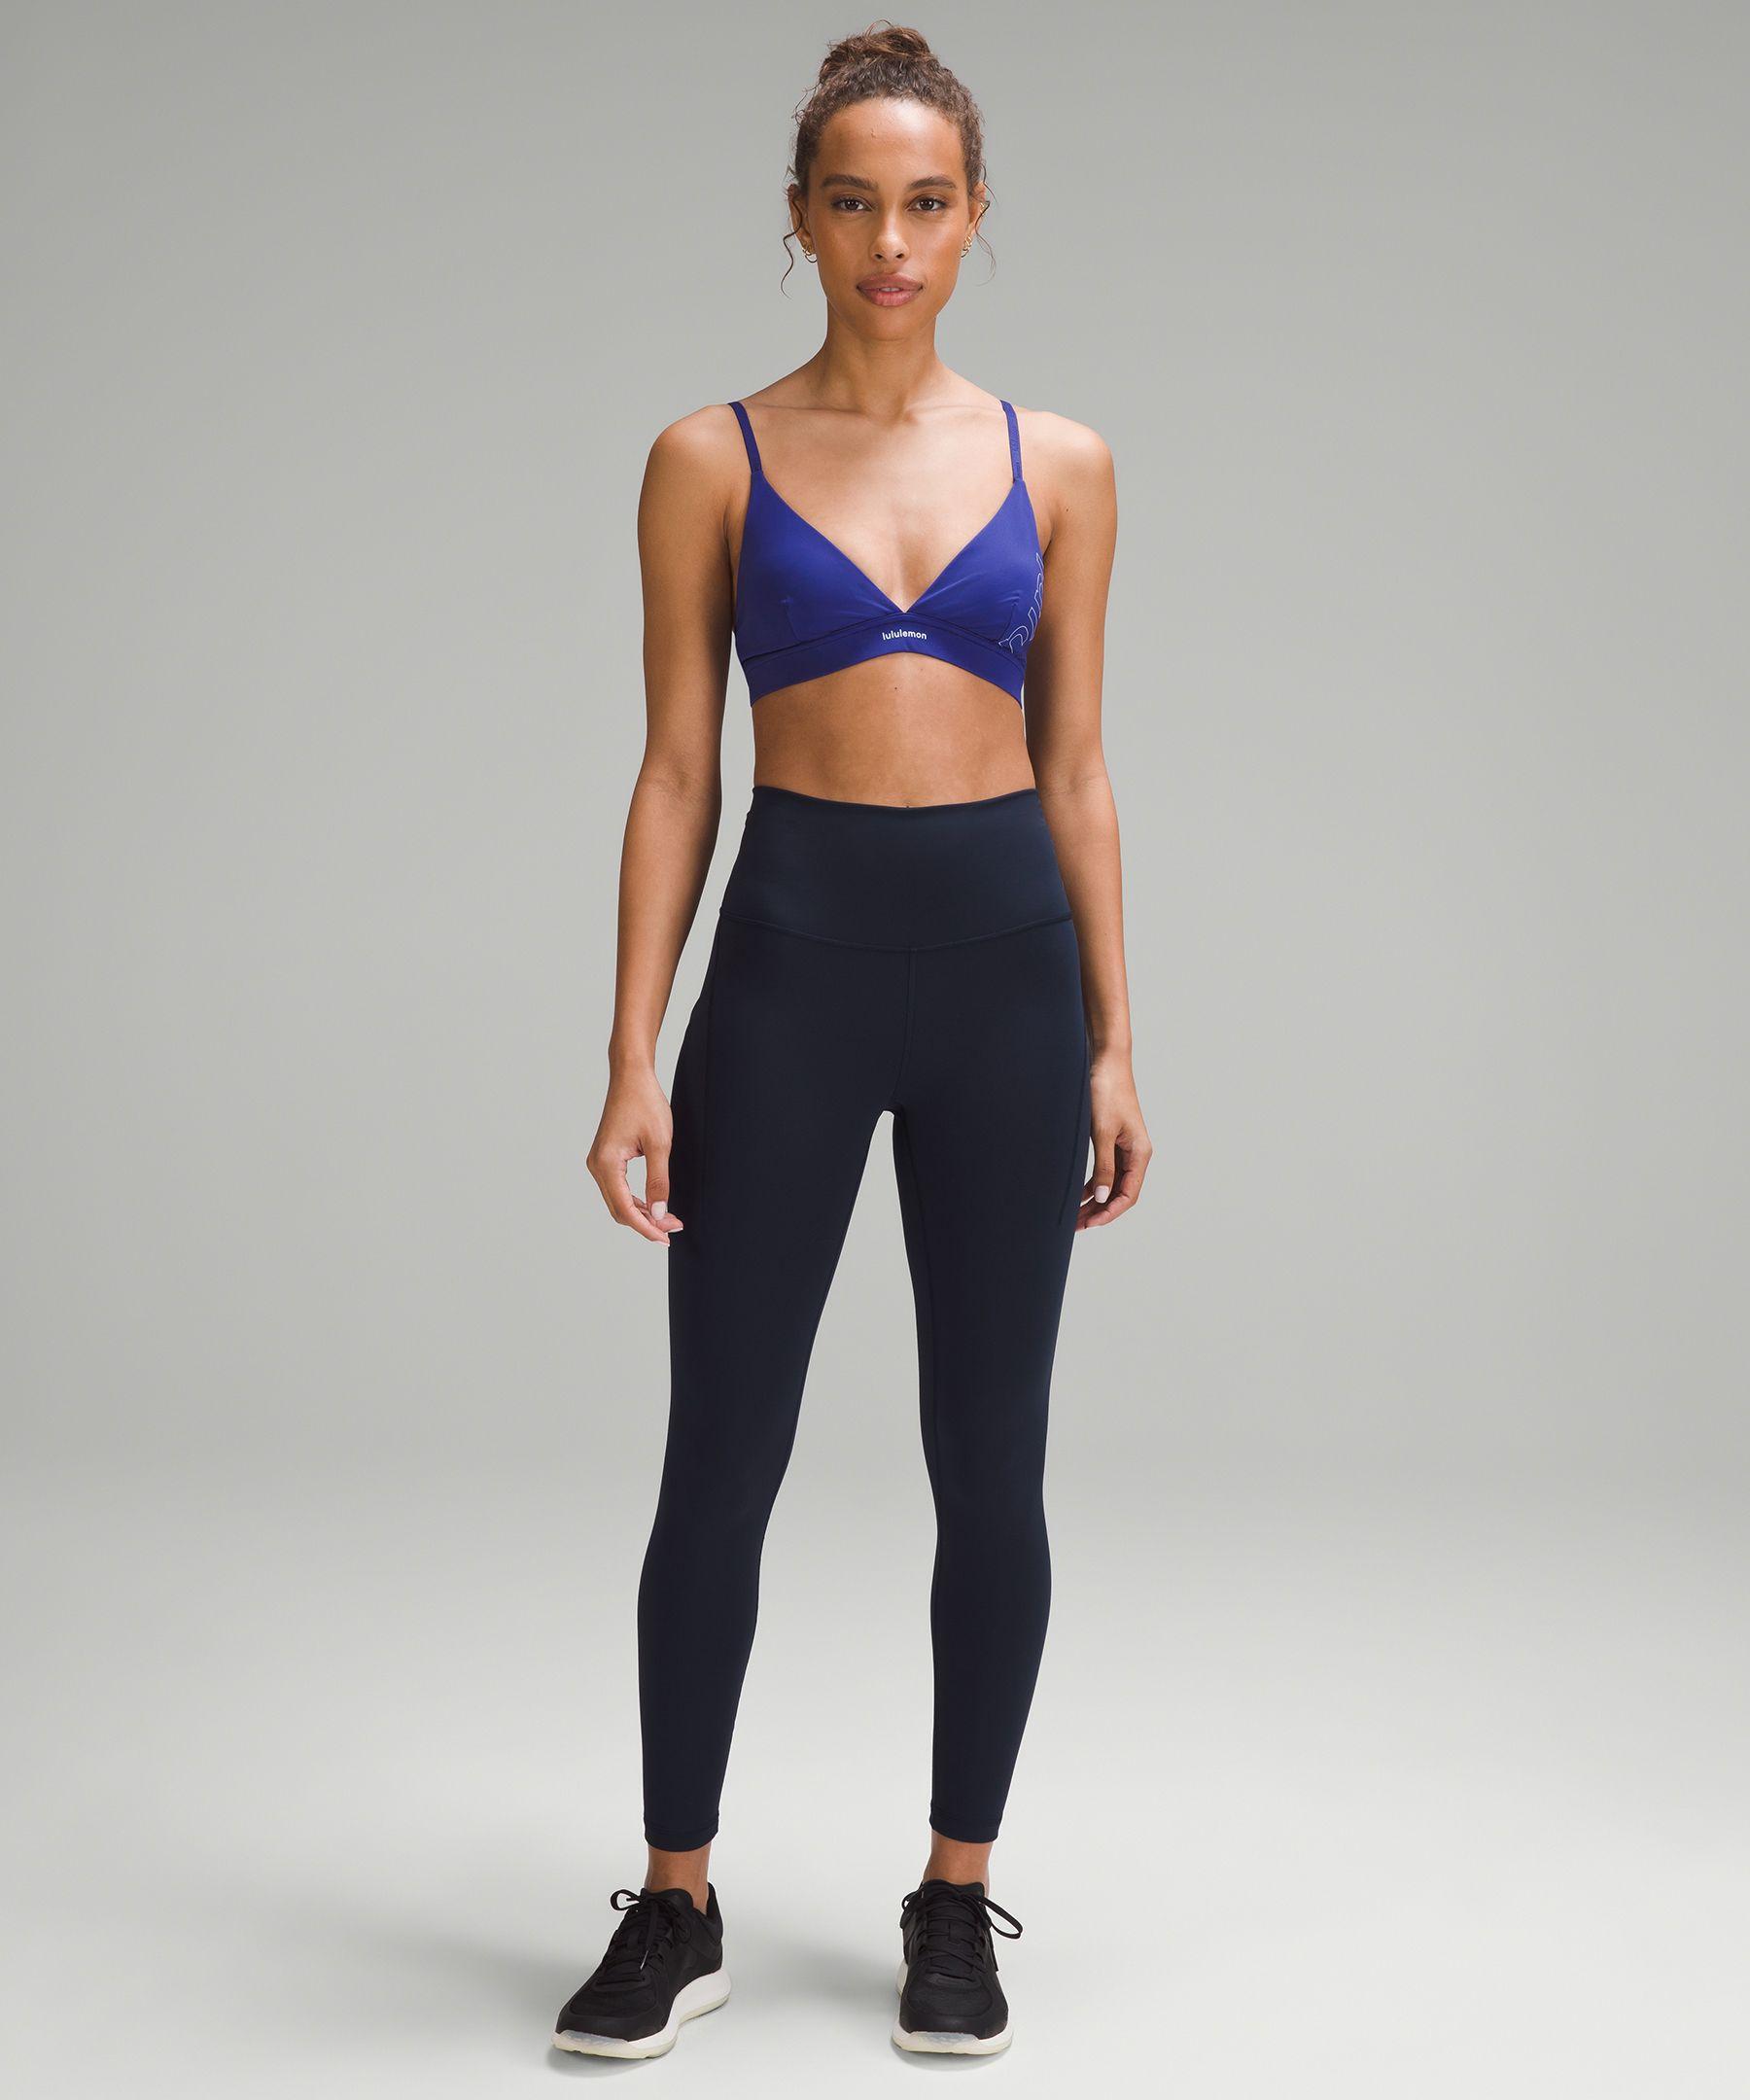 lululemon athletica License To Train Triangle Bra Light Support, A